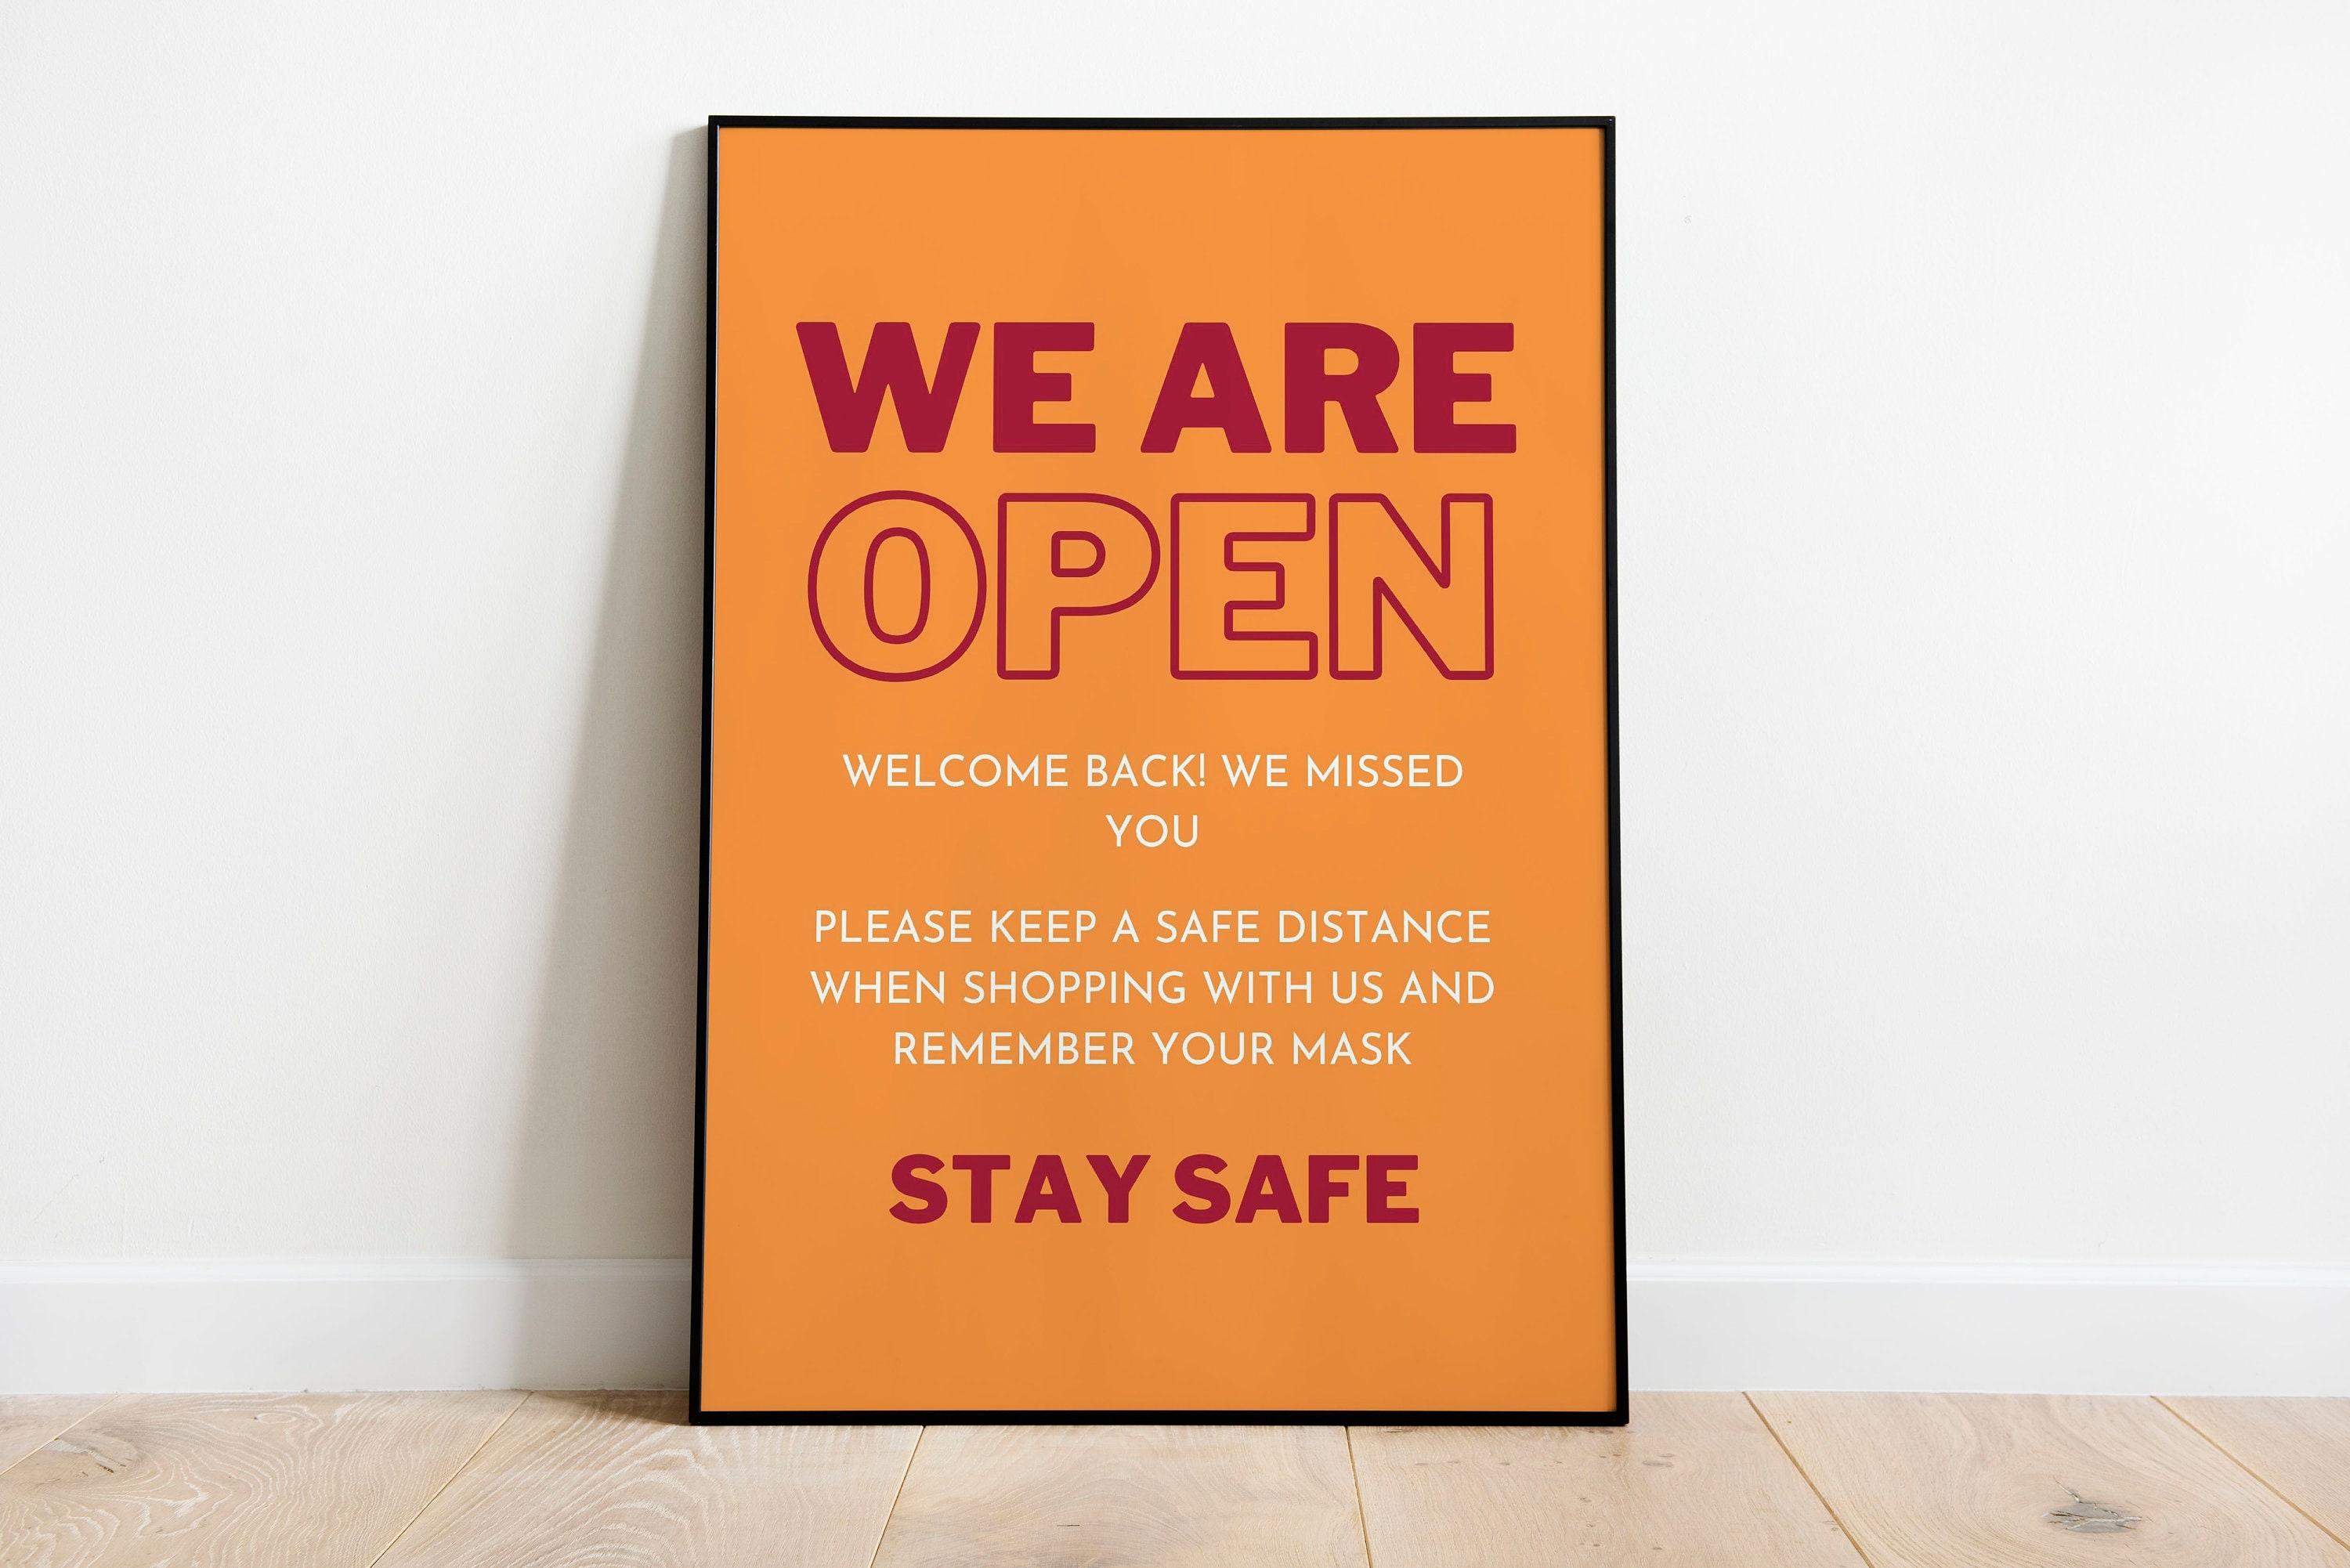 We are open english poster - Barod